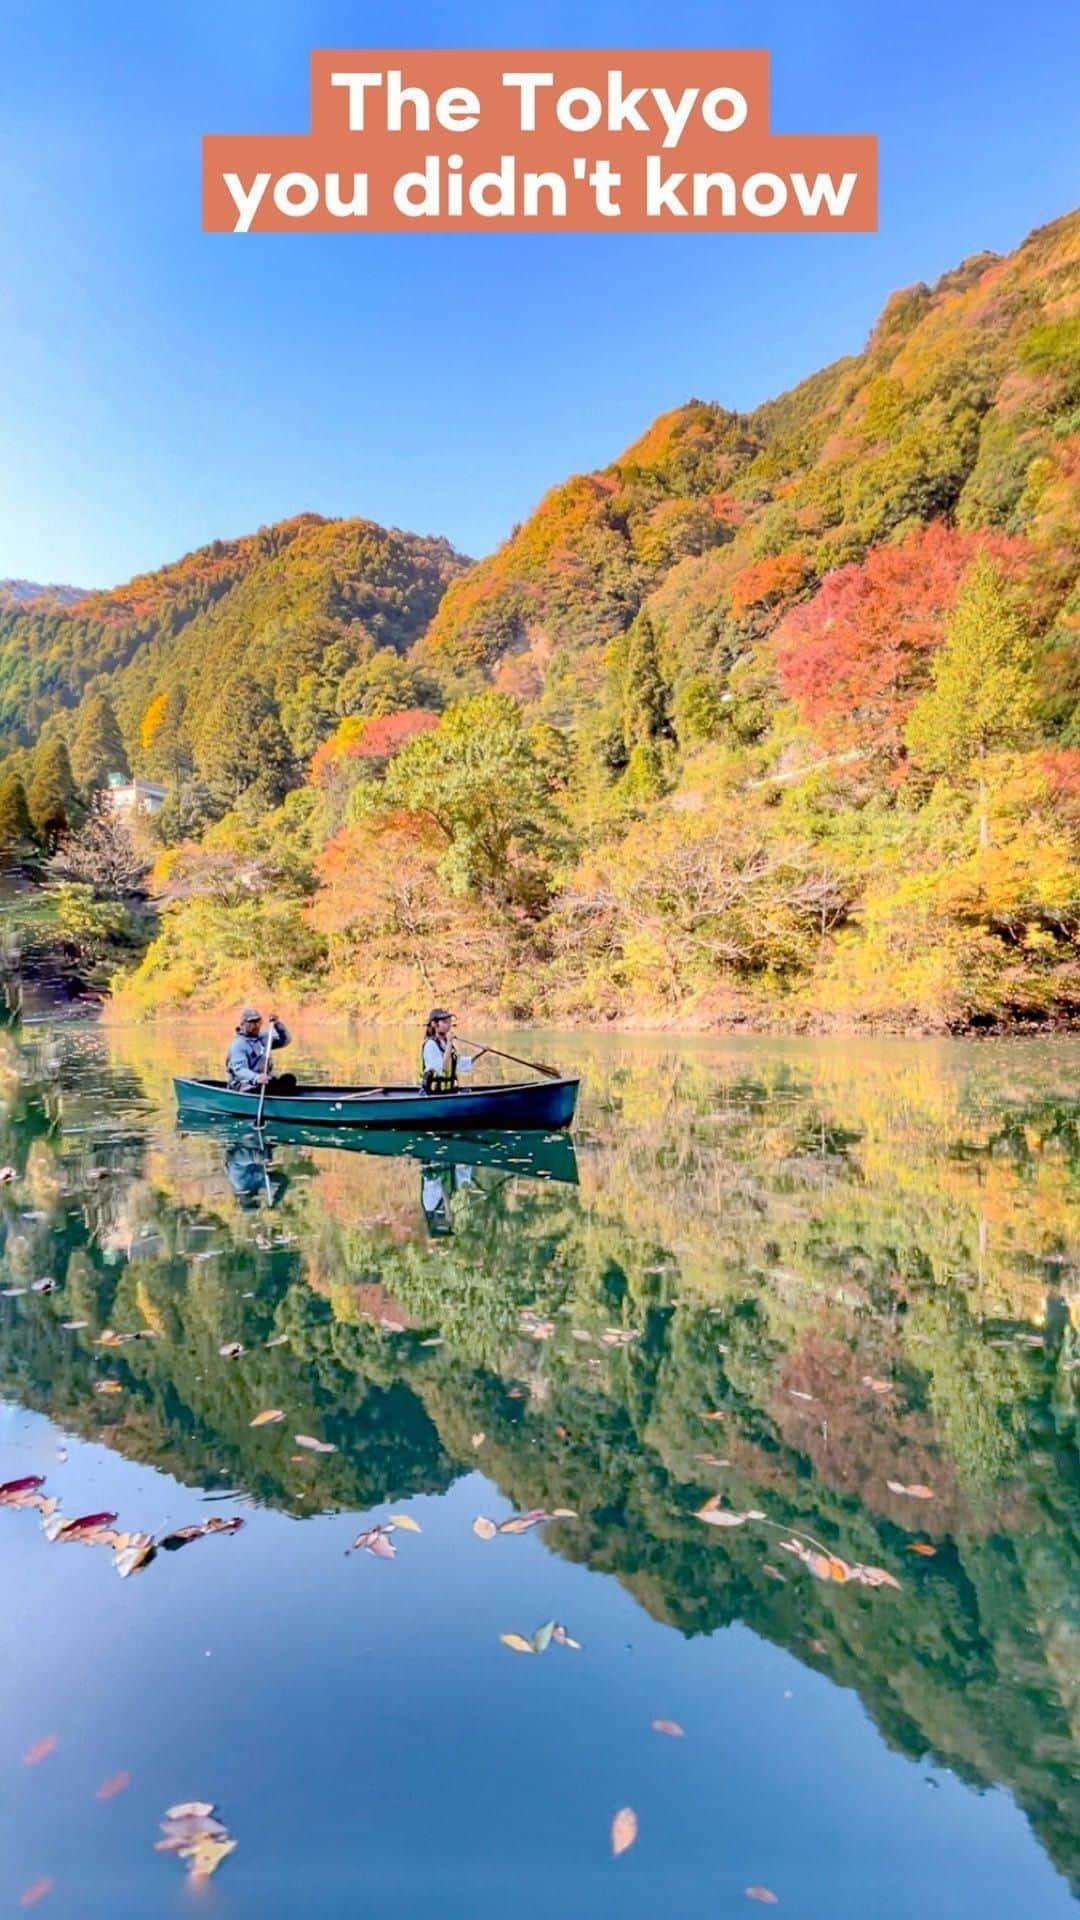 のインスタグラム：「【The Tokyo that you didn’t know】  Can you believe that all the spots shown in this video are still part of Tokyo?  The western region of Tokyo feels worlds apart from the usual buzzling metropolis we are all accustomed to.  Here’s a list of the featured destinations you should consider visiting:  1️⃣ Embrace your inner ninja with Yajin Ninja experience at @hiroshijinkawa 🥷🏼 2️⃣ Experience glamping, a traditional kominka stay, and a serene campsite at @woodlandbothy 🛖 3️⃣ Immerse yourself in nature at the wilderness resort, @shizenjinmura 🏕️ 4️⃣ Savor Tokyo’s finest wines at the @vineyardtama_official 🍷🍇 5️⃣ Enjoy a tranquil moment at the traditional tea house, @kurochaya 🍵 6️⃣ Explore Tokyo’s largest sake brewery, @sawanoi_sake 🍶 7️⃣ Embark on a scenic cycling tour with @trekkling 🚵🏻‍♀️ 8️⃣ Paddle your way to outdoor adventures with canoeing at @susonookutama 🚣🏼‍♀️  And if you’re in pursuit of ultimate comfort, be sure to visit @soranohotel.   This luxurious hotel is nestled in @greensprings_view, a wellness town located in Tachikawa City, filled with lots of dining options. There are also a variety of facilities in Sorano Hotel including an infinity pool and a stylish bar for you to spend your night at.  Tachikawa City is your gateway to Tokyo’s abundant nature, all while relishing in the urban comforts of the city. 🛏️ 🍹🥂  Be sure to check them out on your next trip to Tokyo!  📍Tokyo」